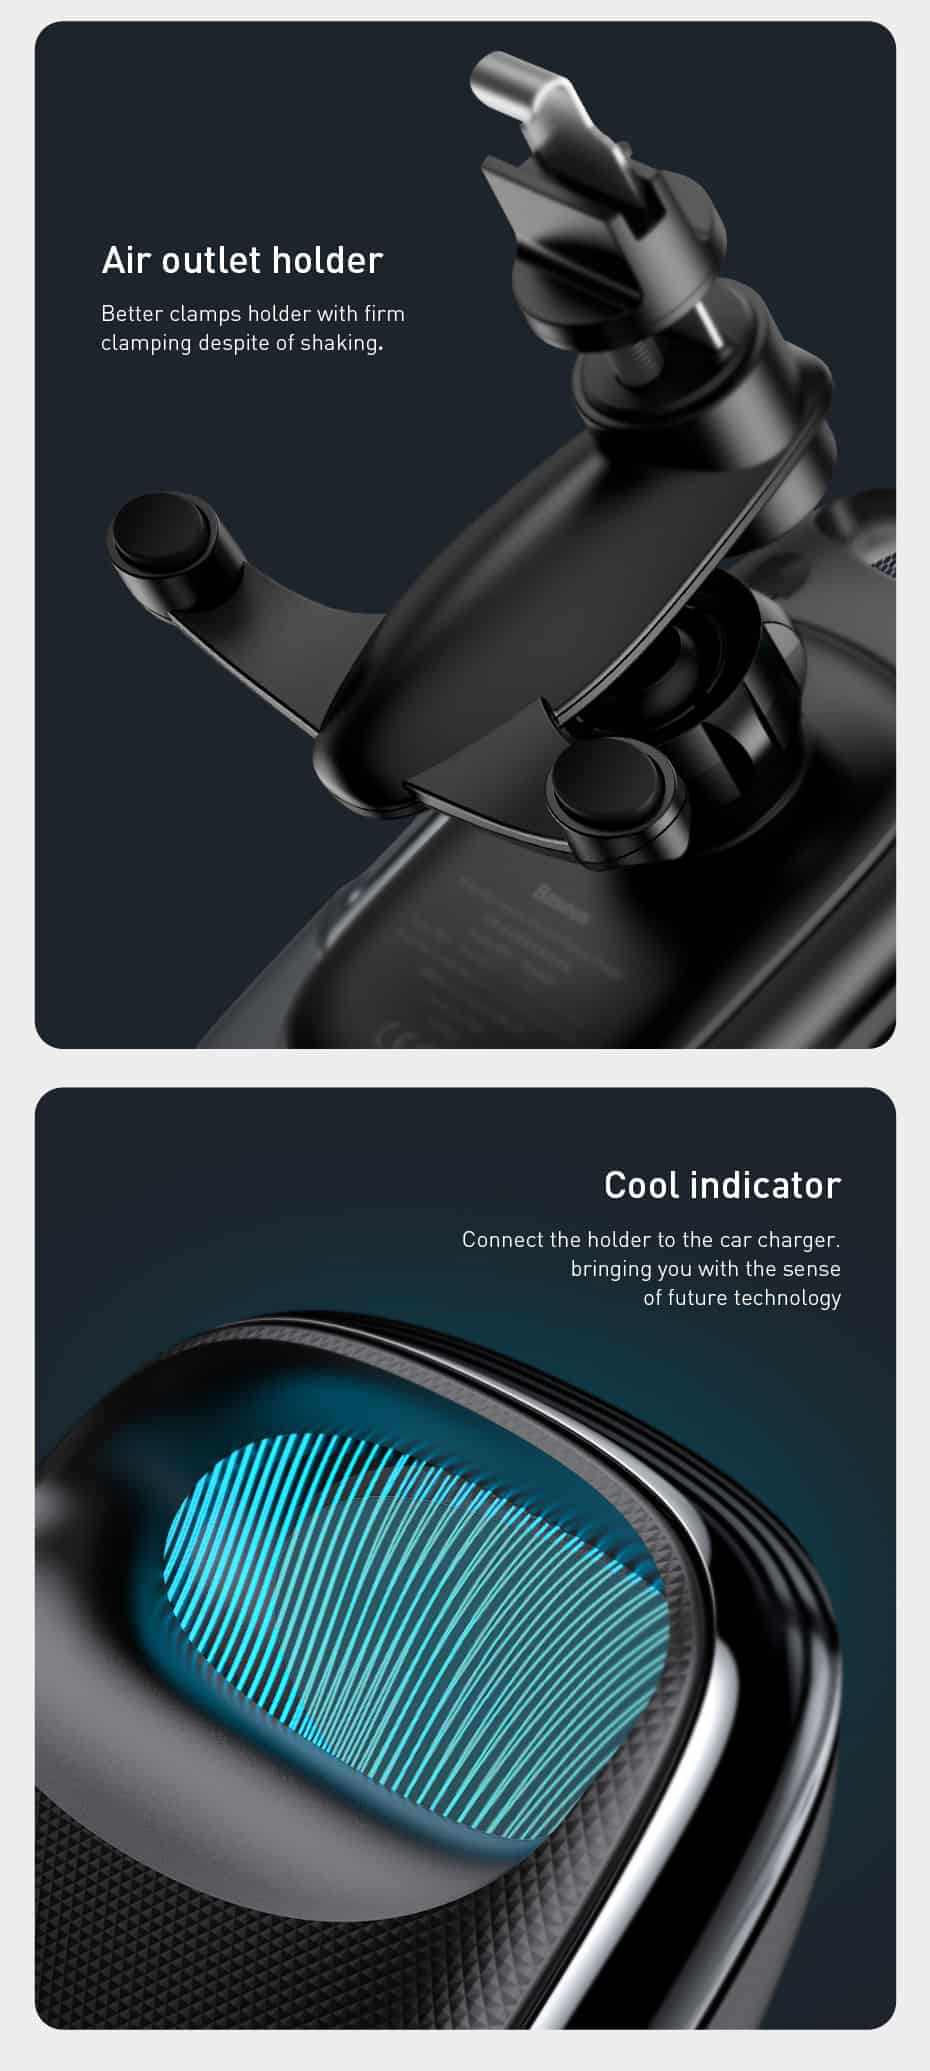 Baseus 15W Car Fast Charger QI Wireless Charger For iPhone 11 Samsung Android Wirless Charging Car Phone Holder Car Stand